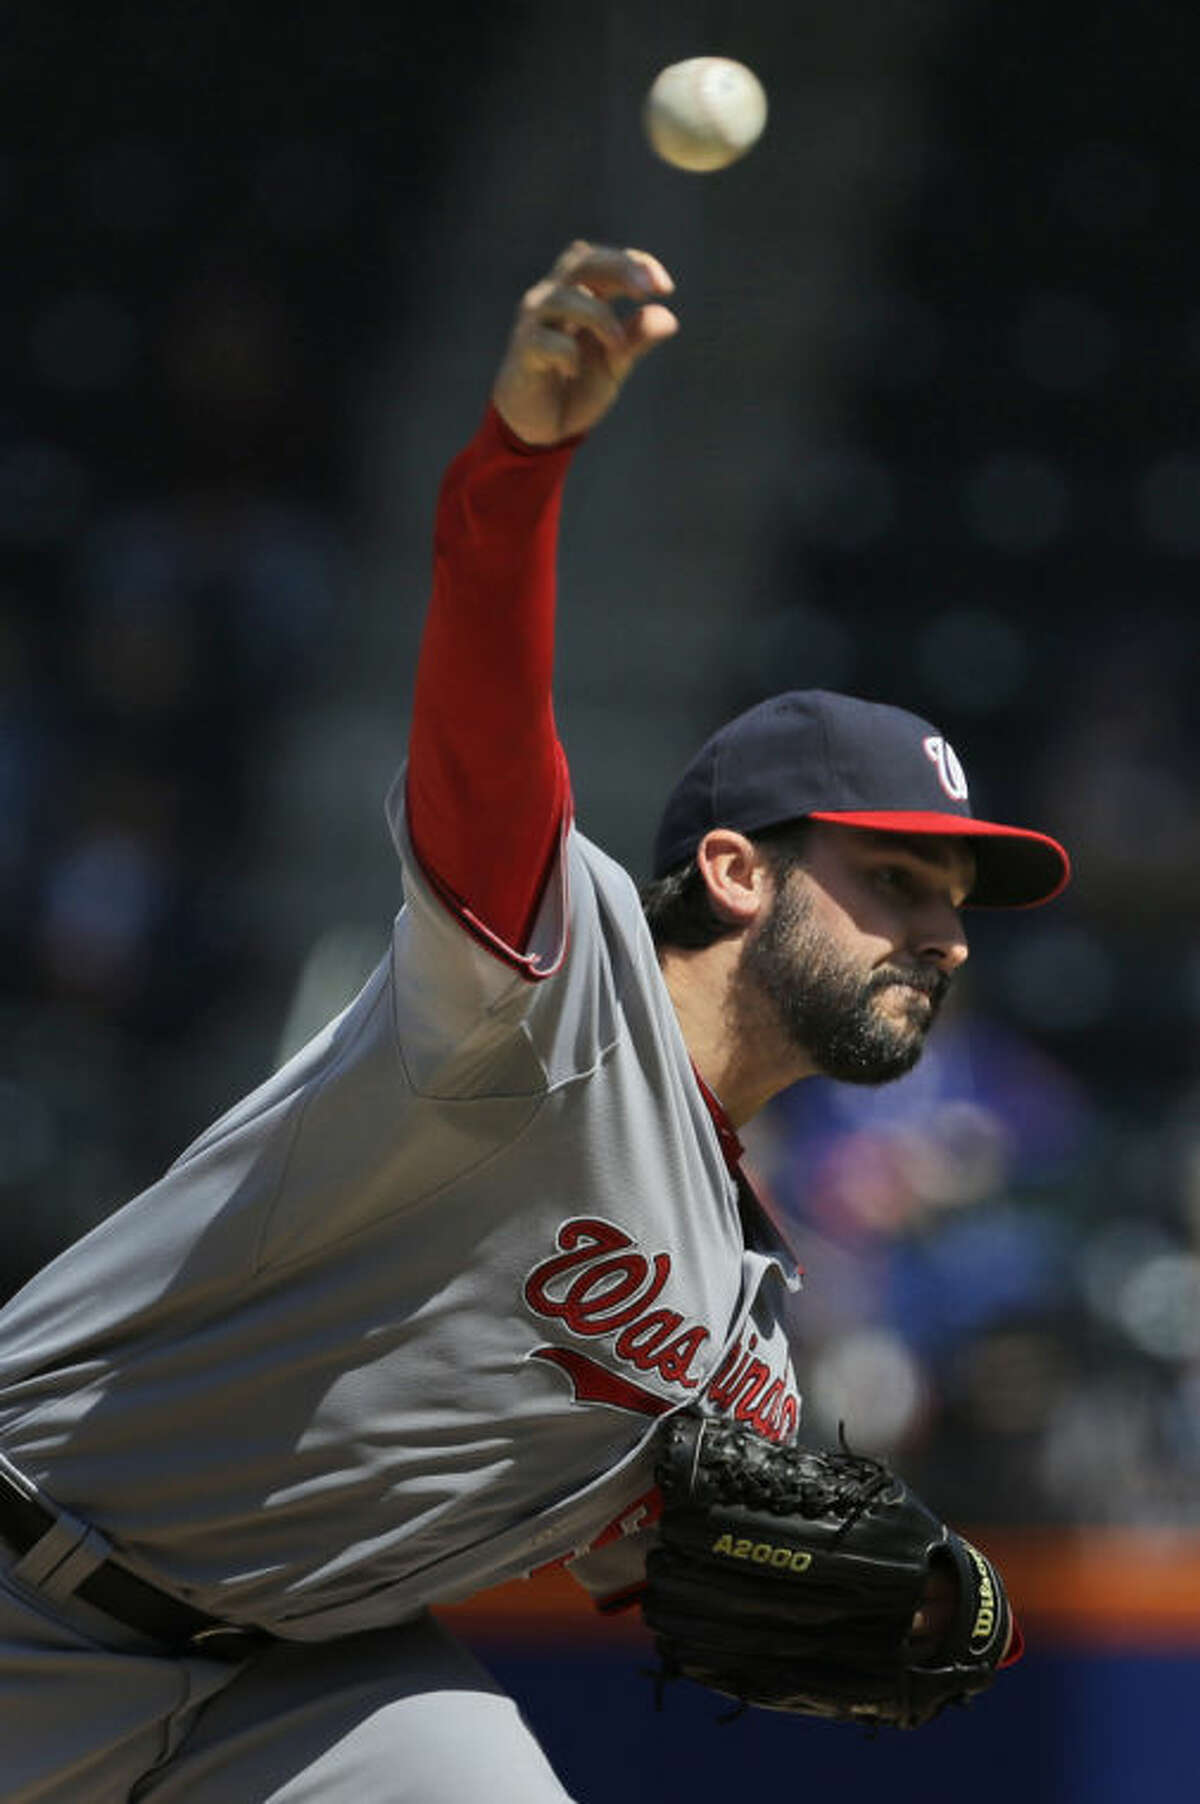 Washington Nationals pitcher Tanner Roark throws during the first inning of a baseball game against the New York Mets at Citi Field, Thursday, April 3, 2014, in New York. (AP Photo/Seth Wenig)